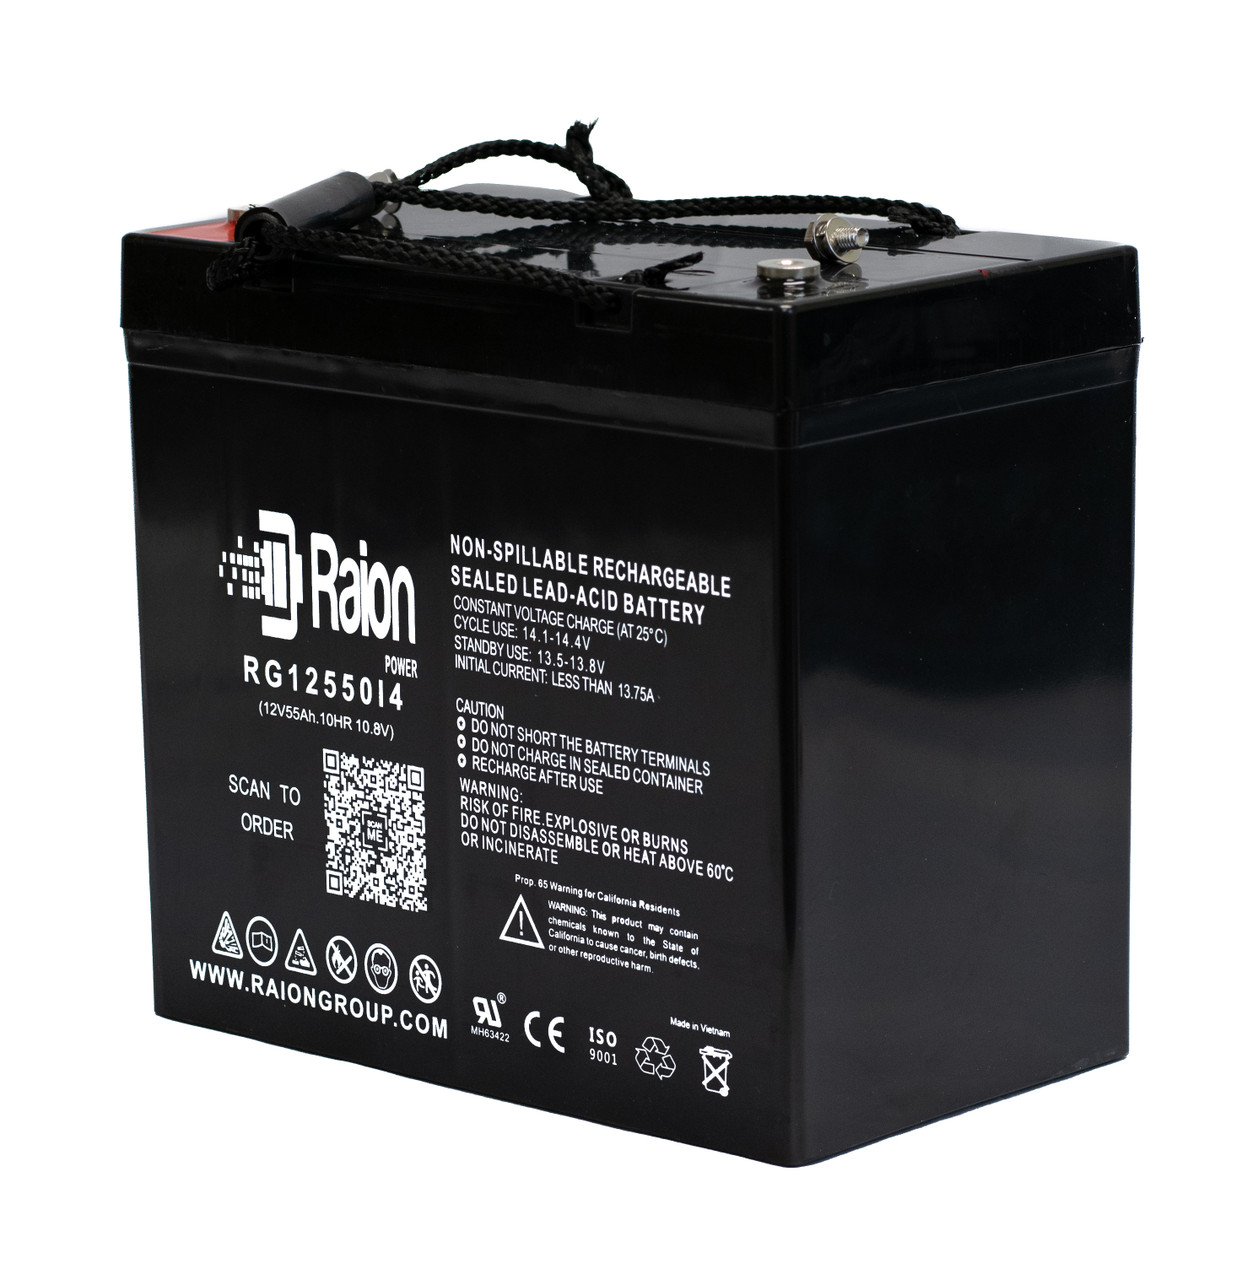 Raion Power 12V 55Ah 22NF Mobility Scooter Battery Replacement for Pride Jazzy 1115